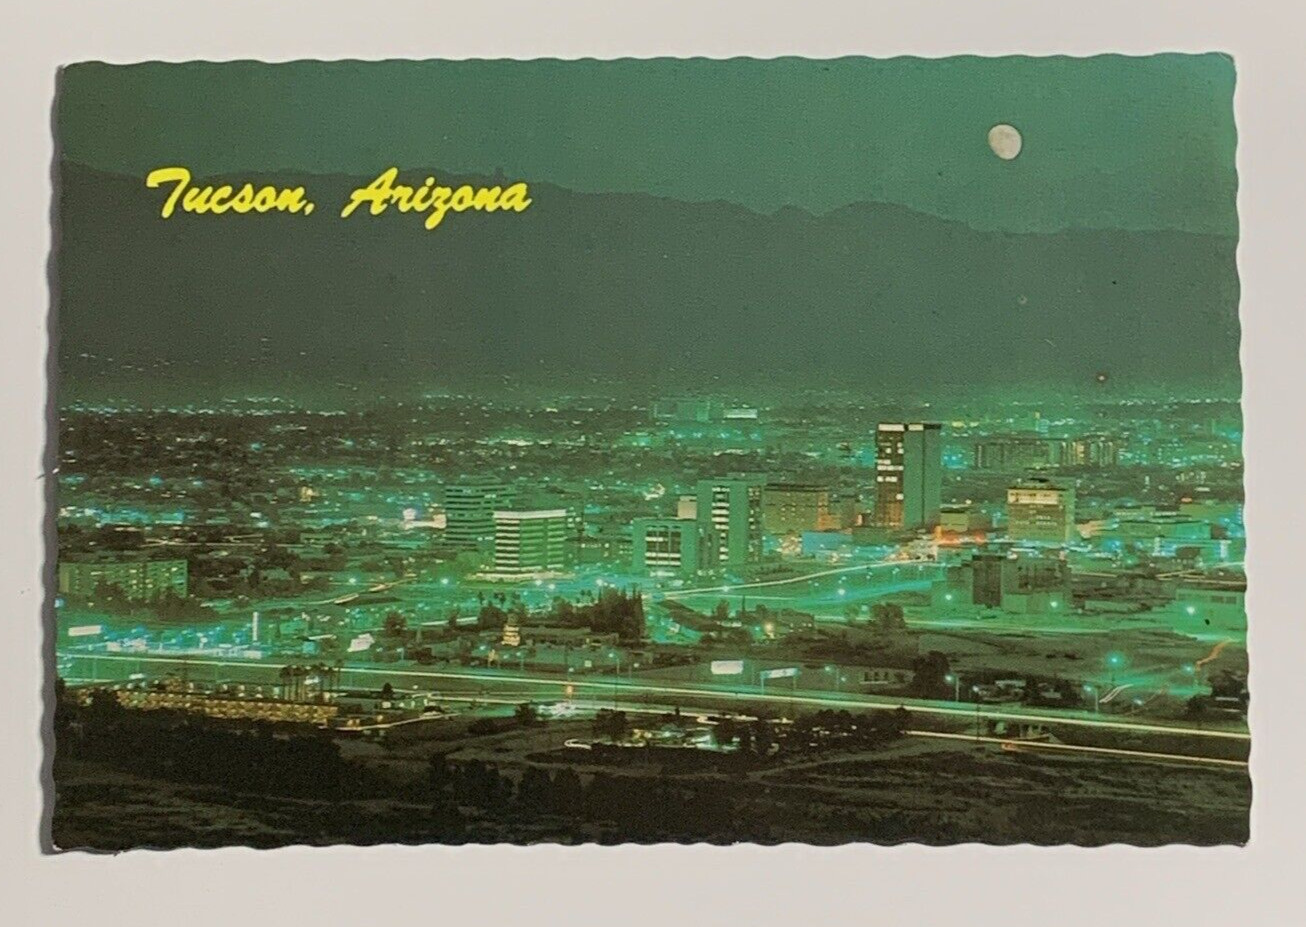 Tucson Arizona at Night As Seen From \